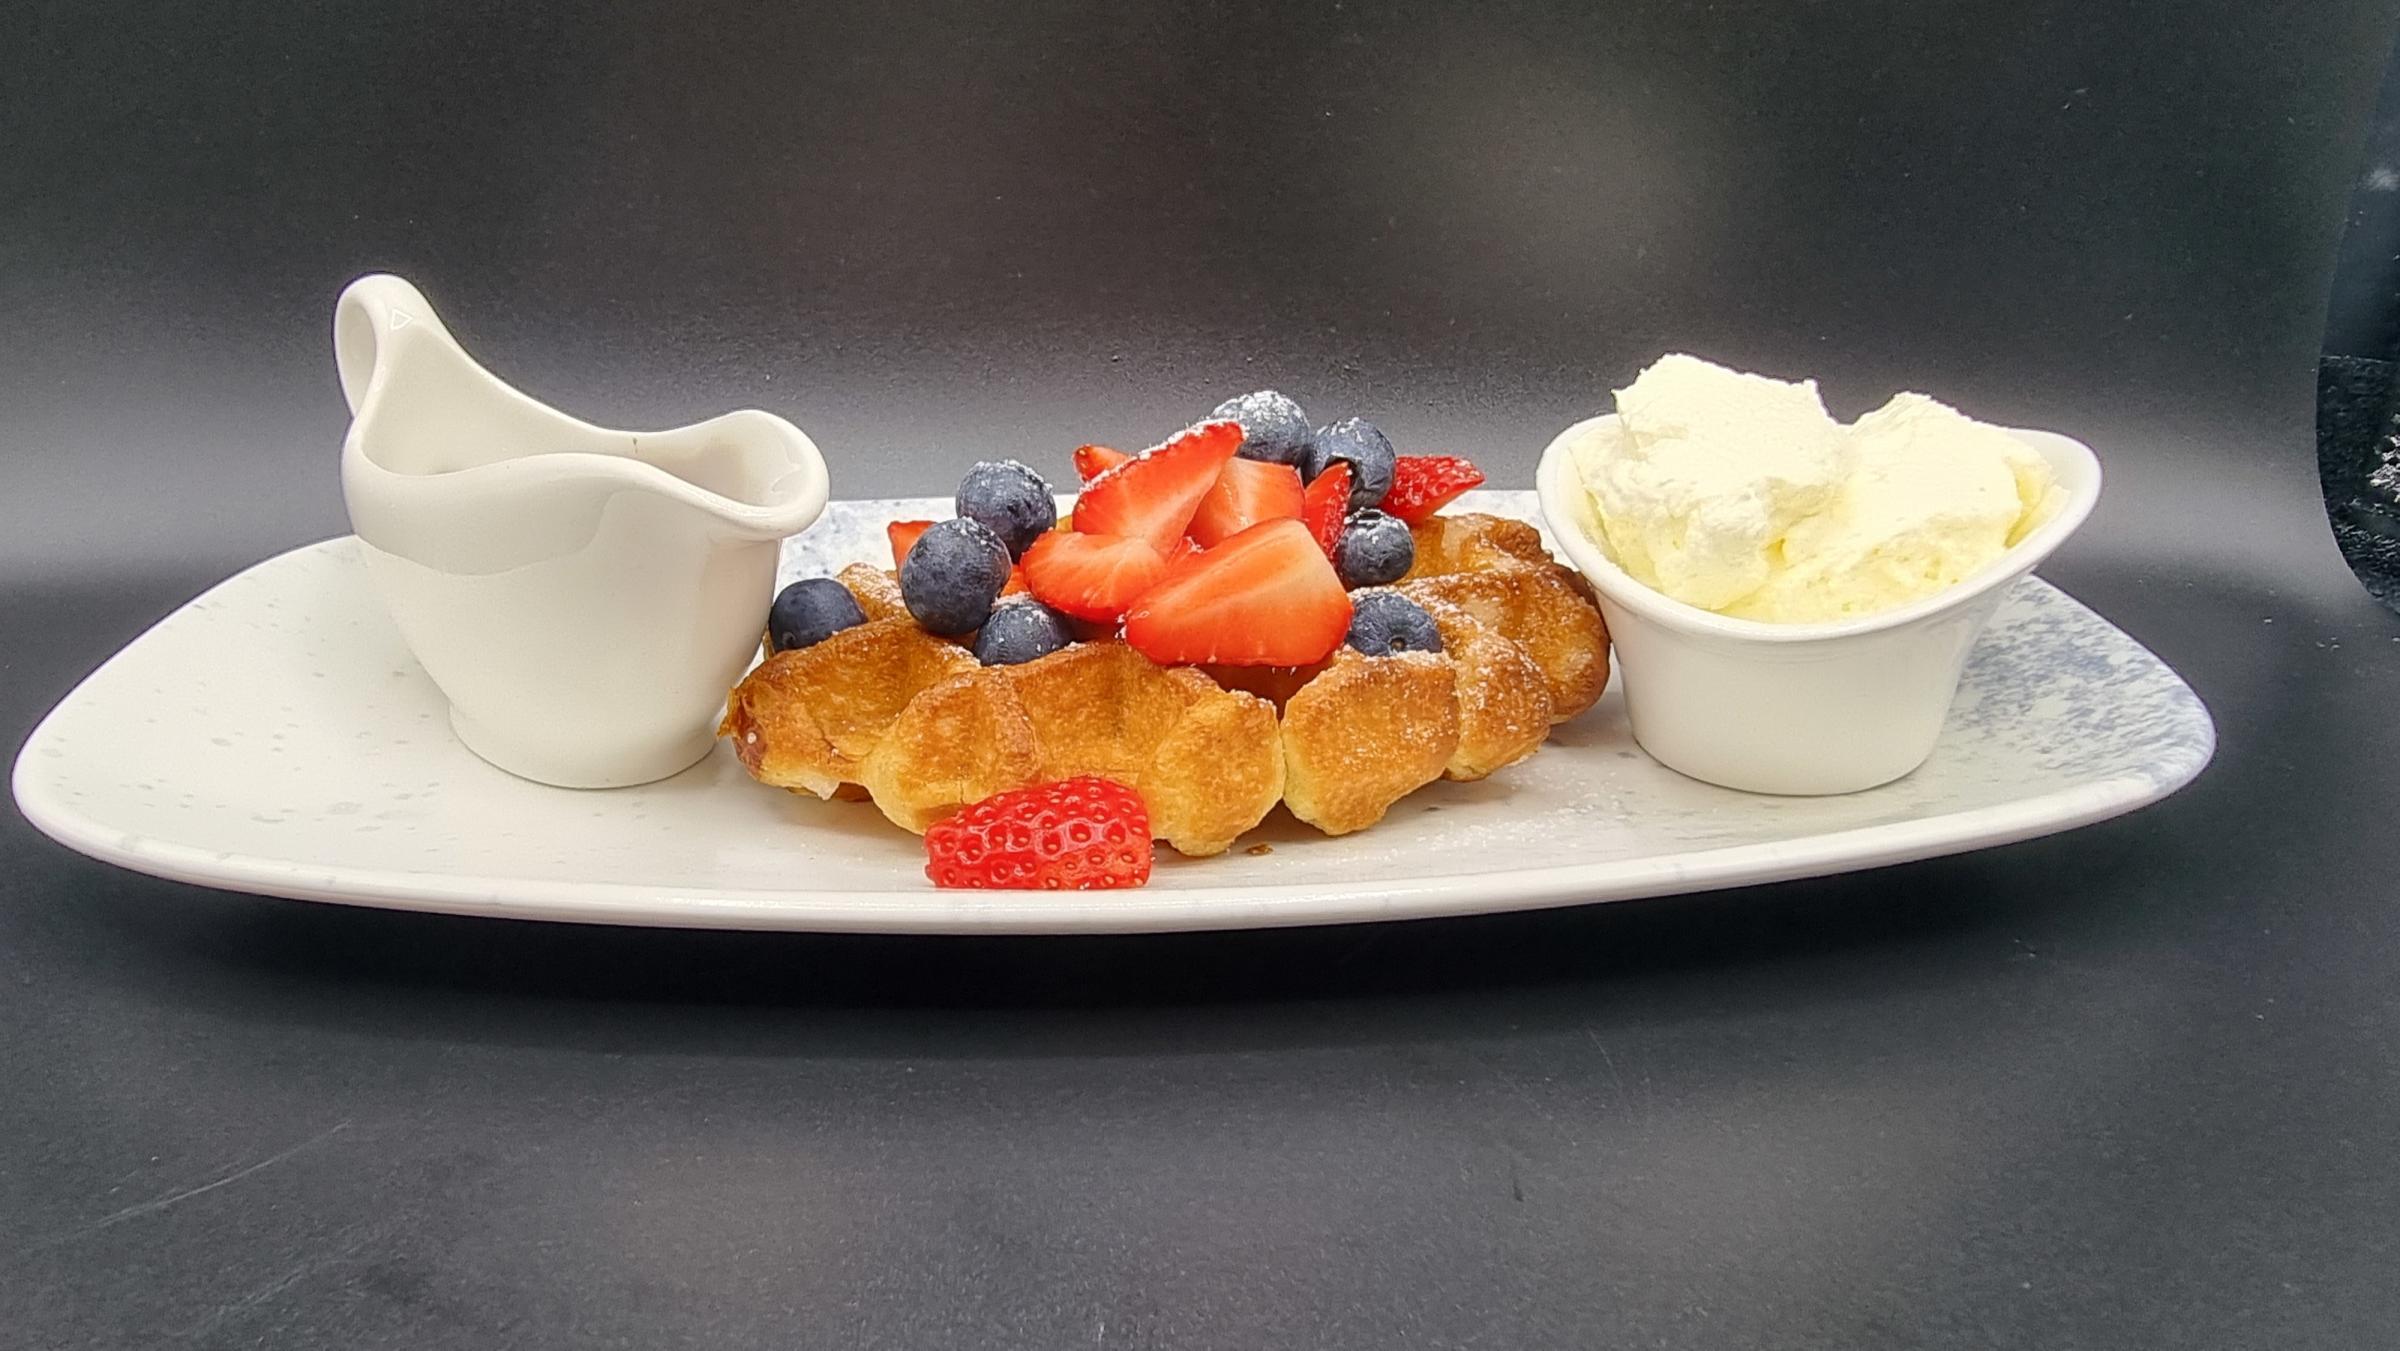 How about a sweeter start to the day with waffles and fruit?